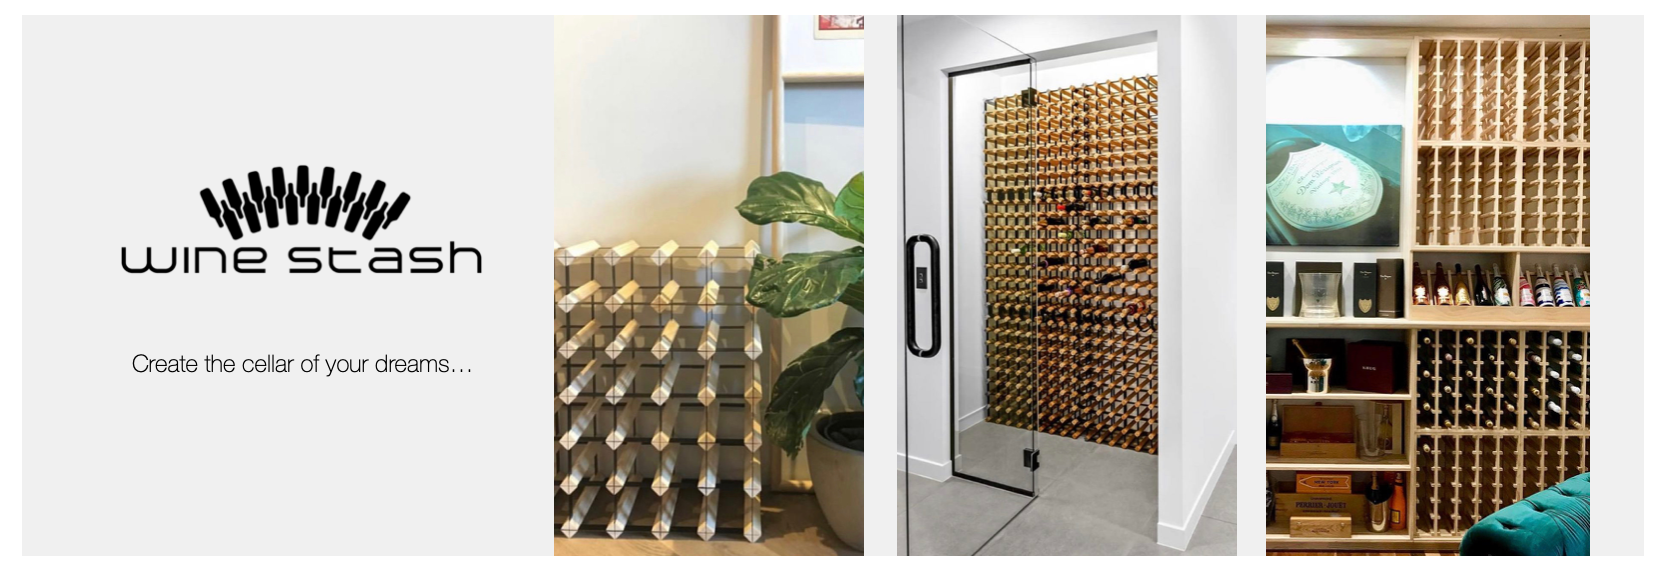 Welcome to Wine Stash. Simplistic, Premium Wine Storage. This is the About Us Page, where you can learn all about Wine Stash and our environmental initiatives. Feel free to reach out to a member of the Wine Stash team if you have any additional questions.